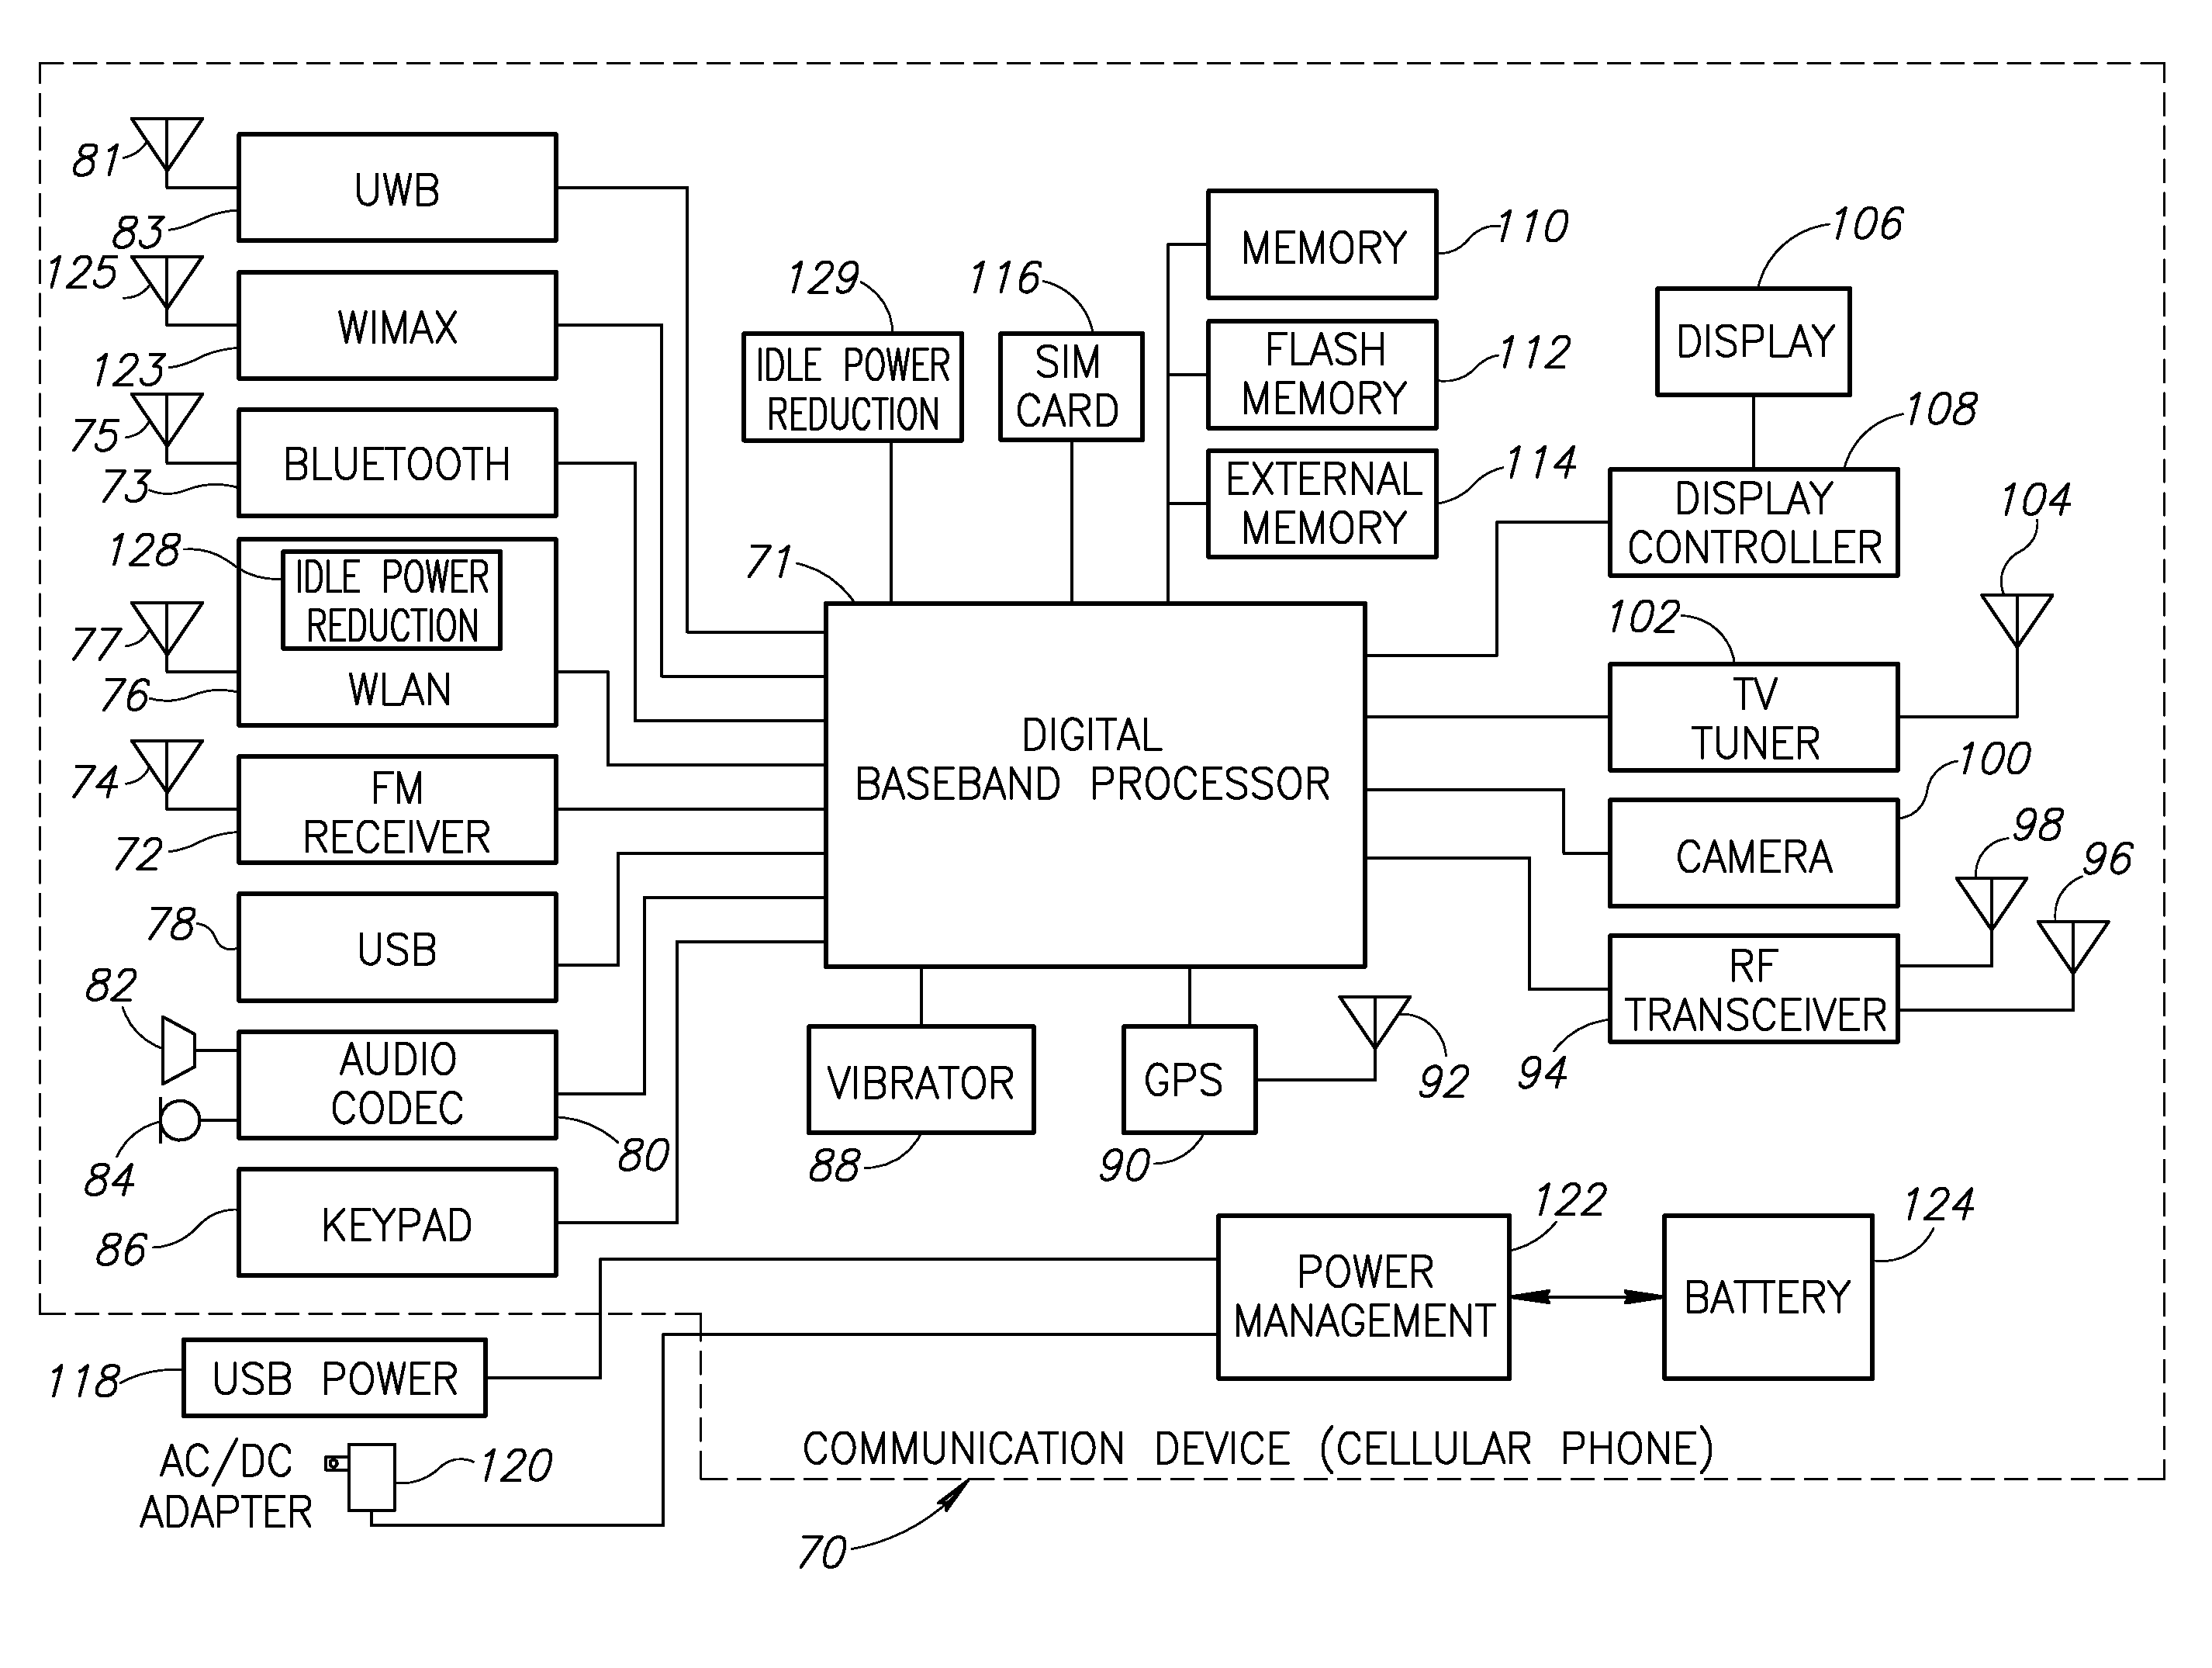 Idle connection state power consumption reduction in a wireless local area network using beacon delay advertisement